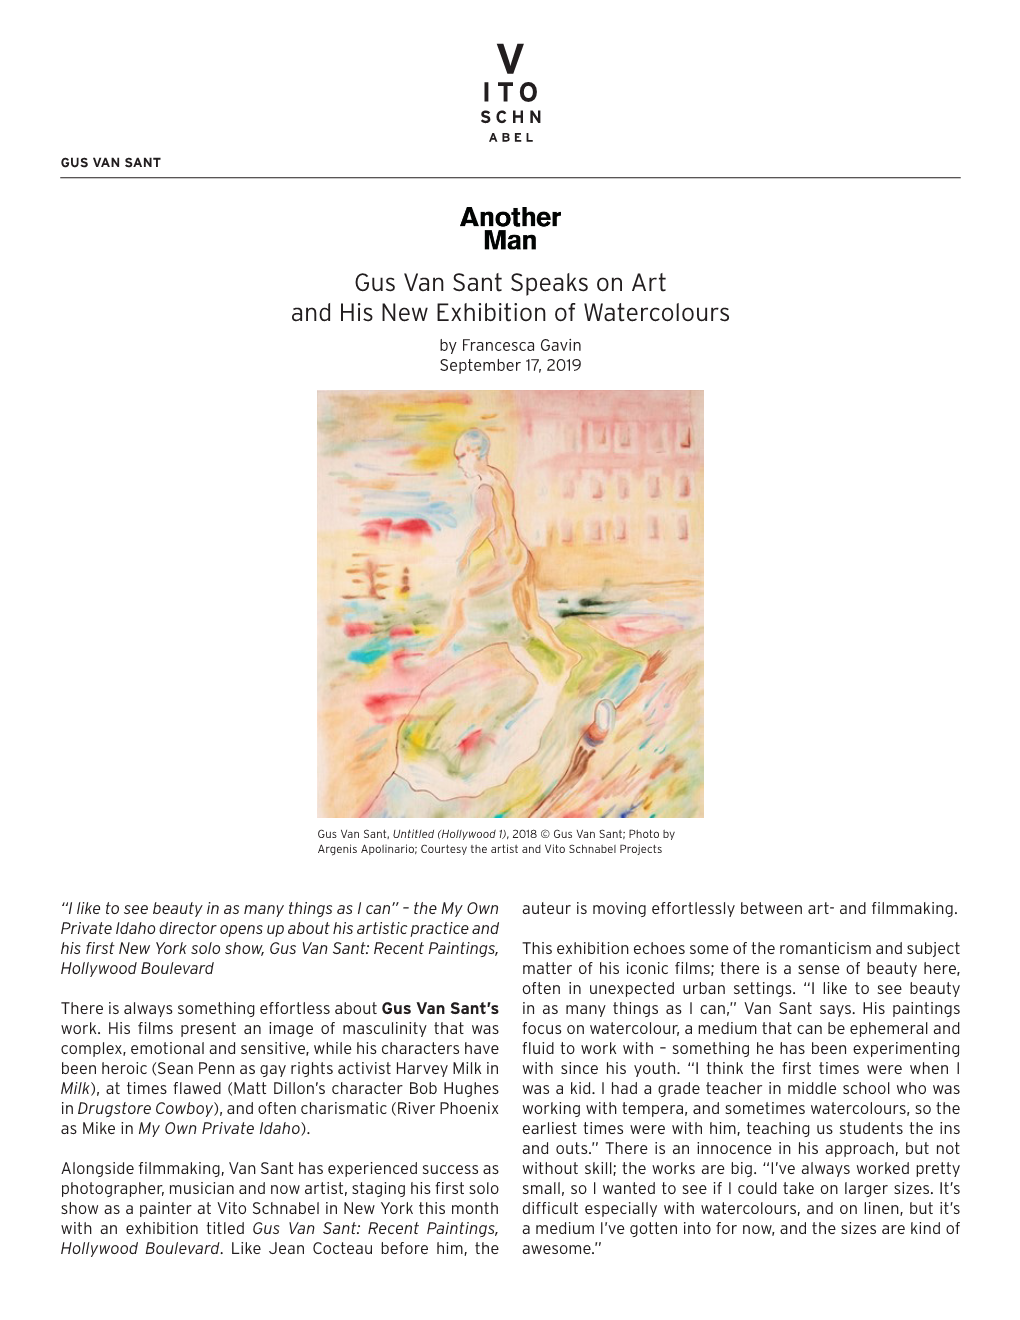 Gus Van Sant Speaks on Art and His New Exhibition of Watercolours by Francesca Gavin September 17, 2019